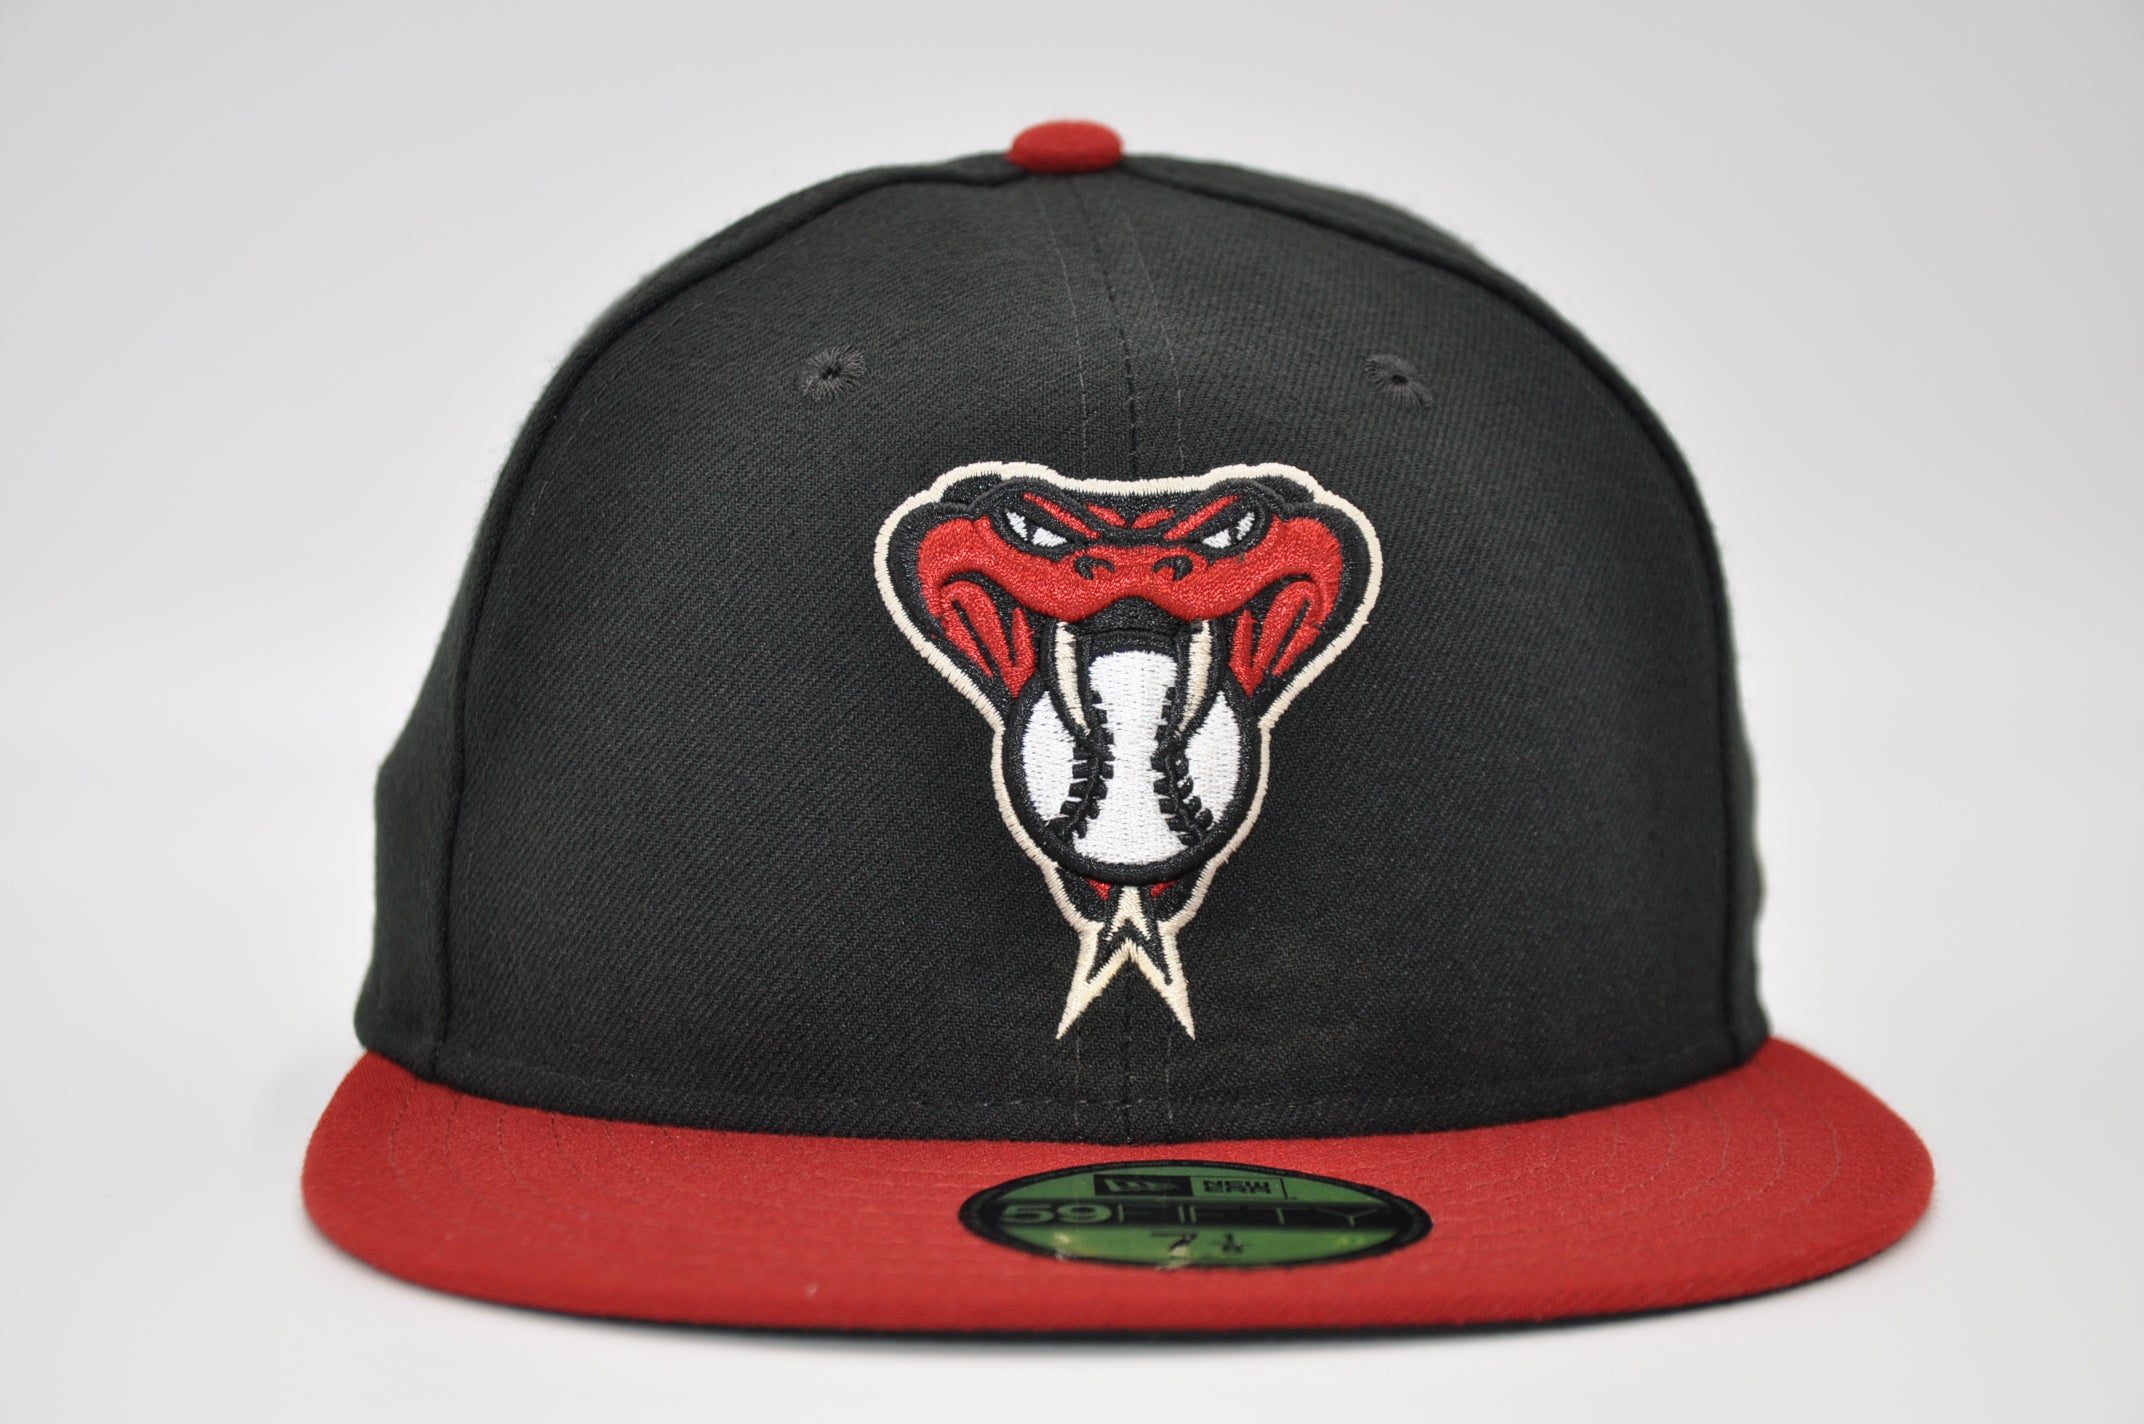 New Era Black/Red Arizona Diamondbacks Authentic Collection On-Field 59FIFTY Fitted Hat